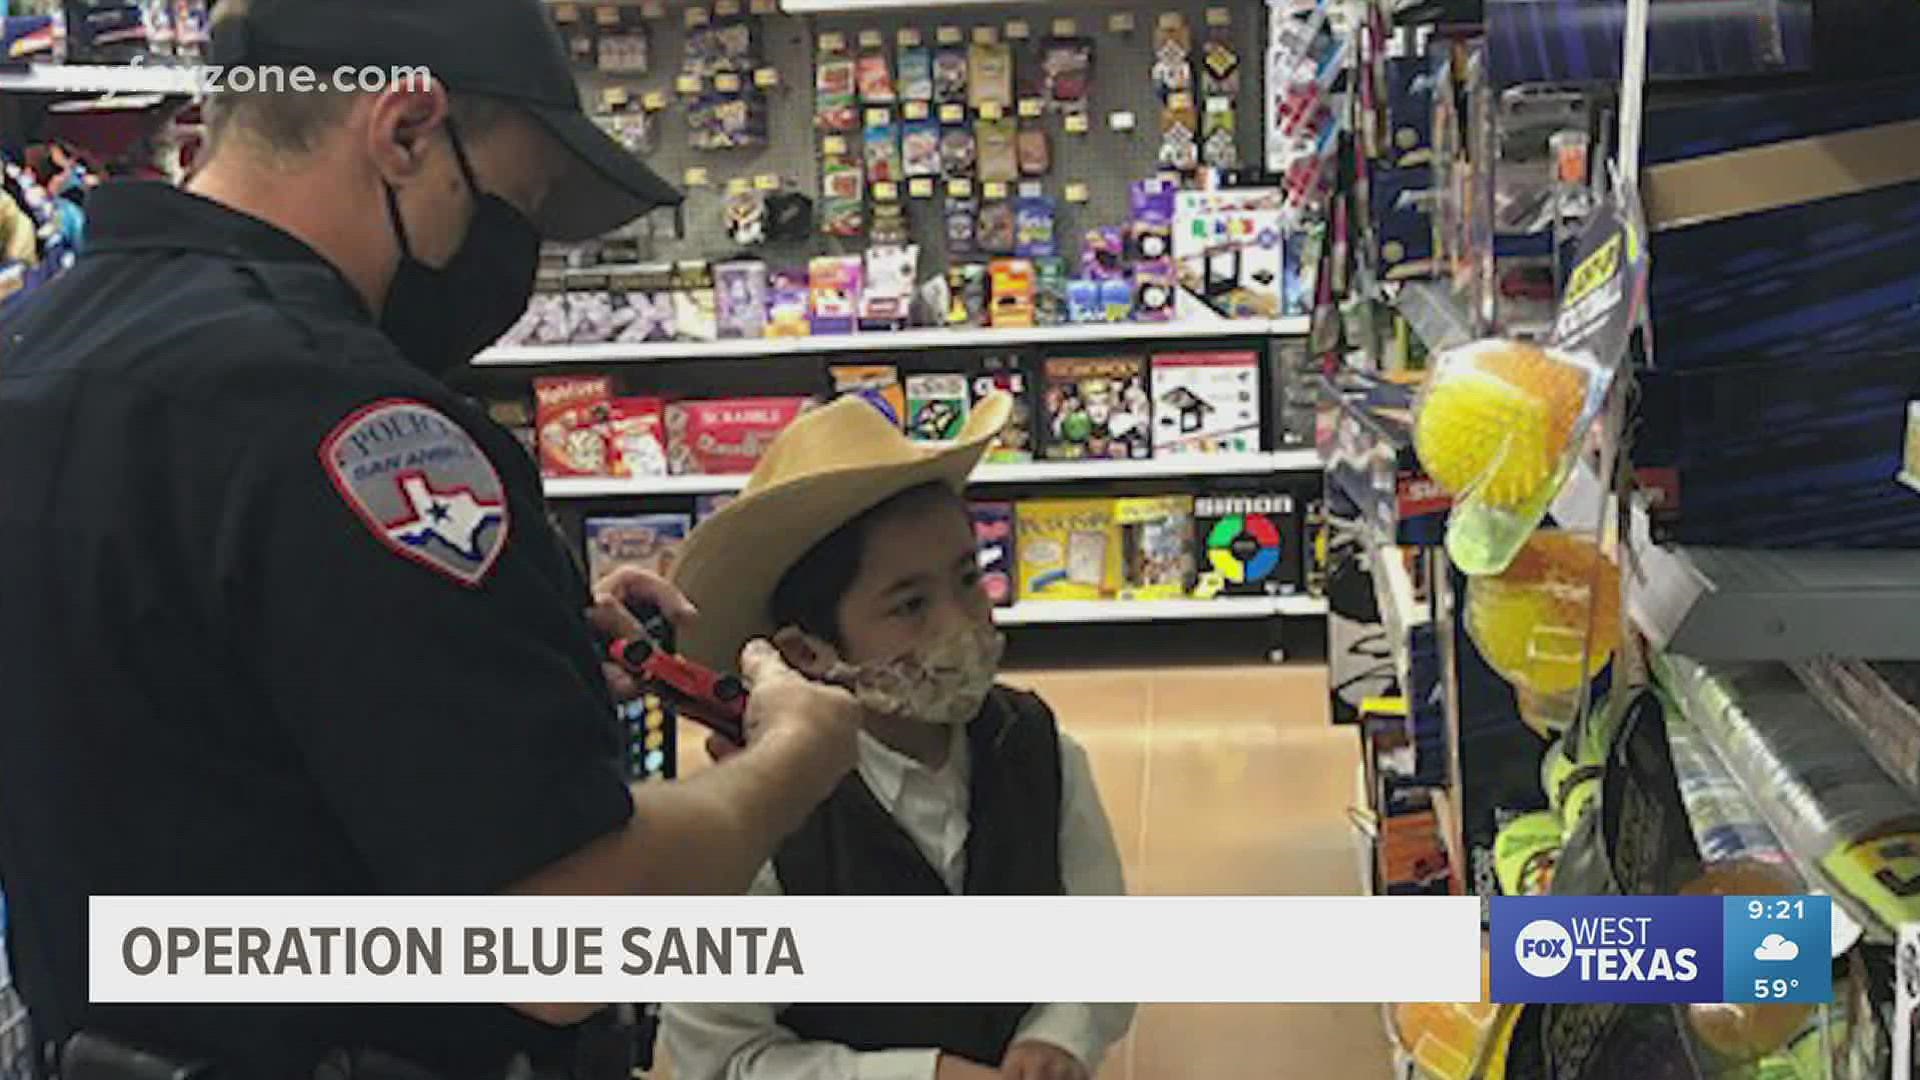 This year's event marks the 16th year the 'shop with a cop' program has brought smiles to San Angelo children.